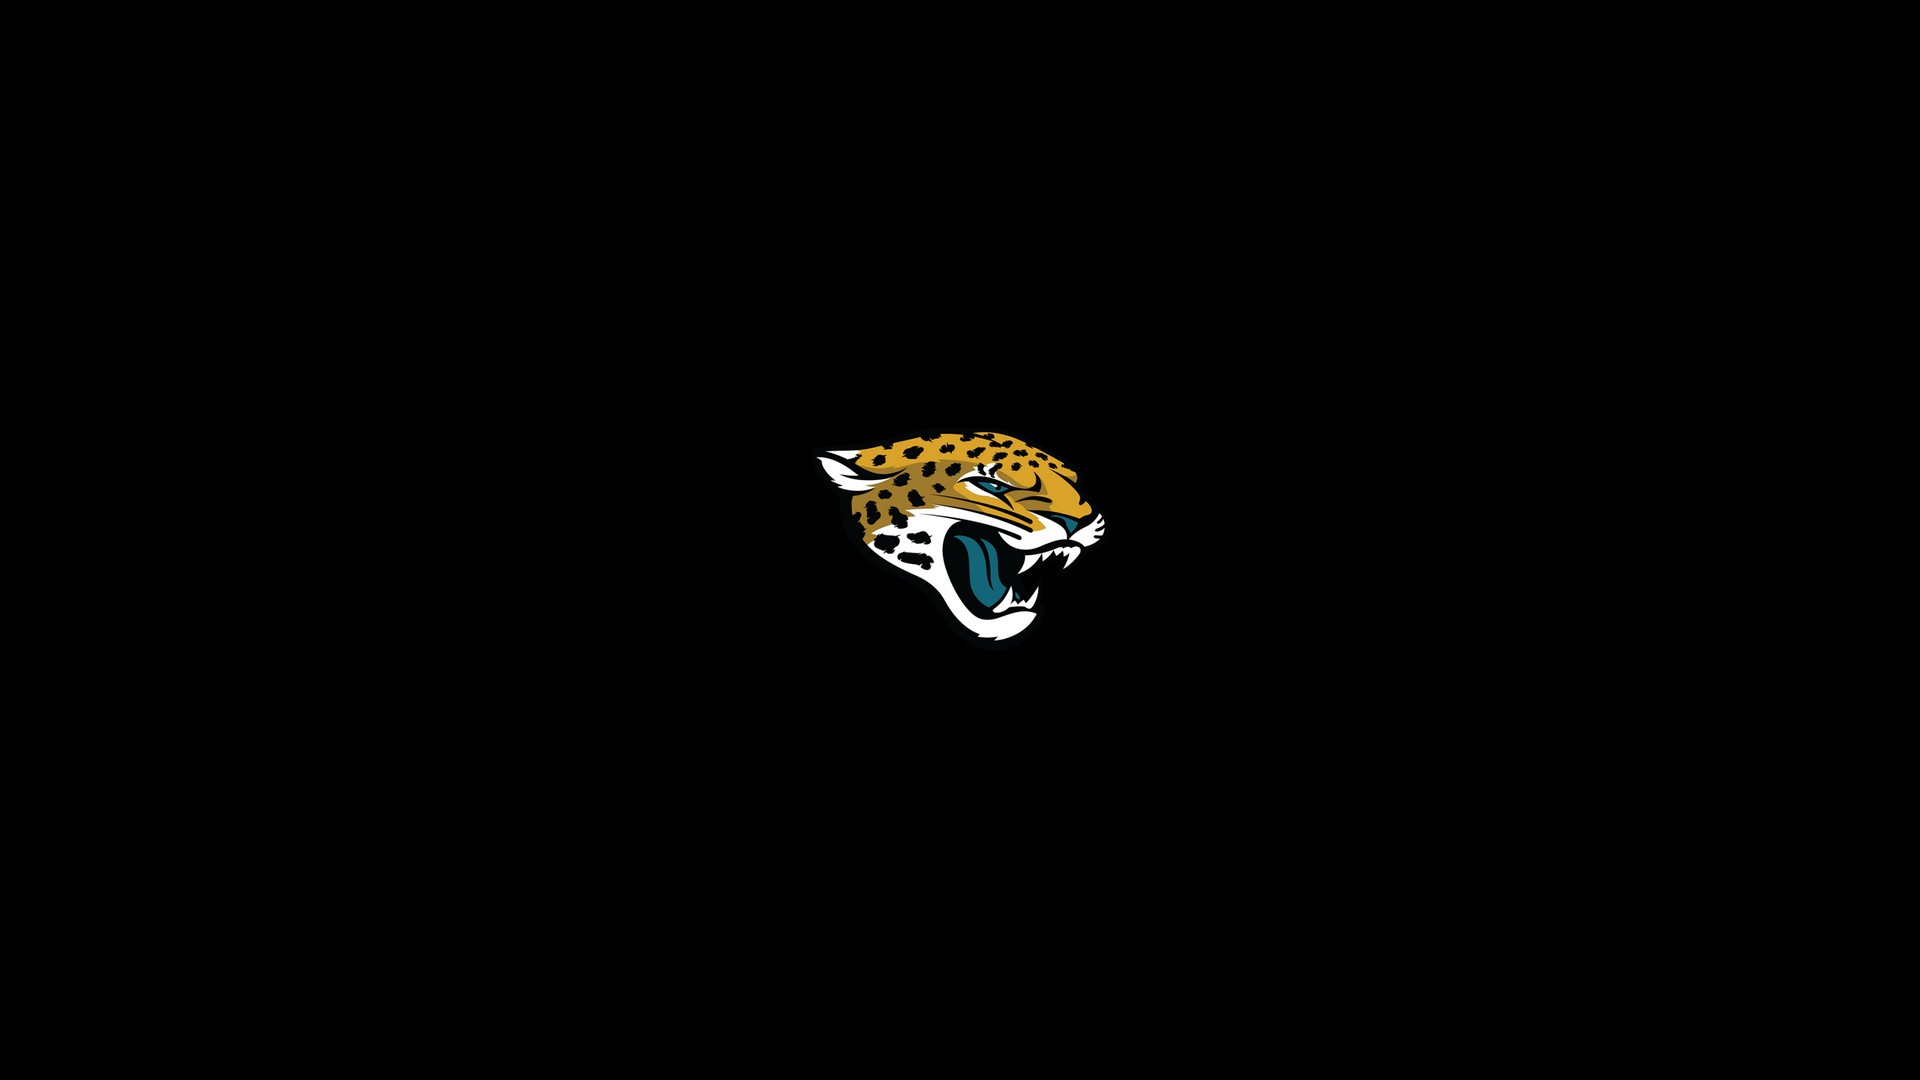 Backgrounds Jacksonville Jaguars HD with resolution 1920x1080 pixel. You can make this wallpaper for your Mac or Windows Desktop Background, iPhone, Android or Tablet and another Smartphone device